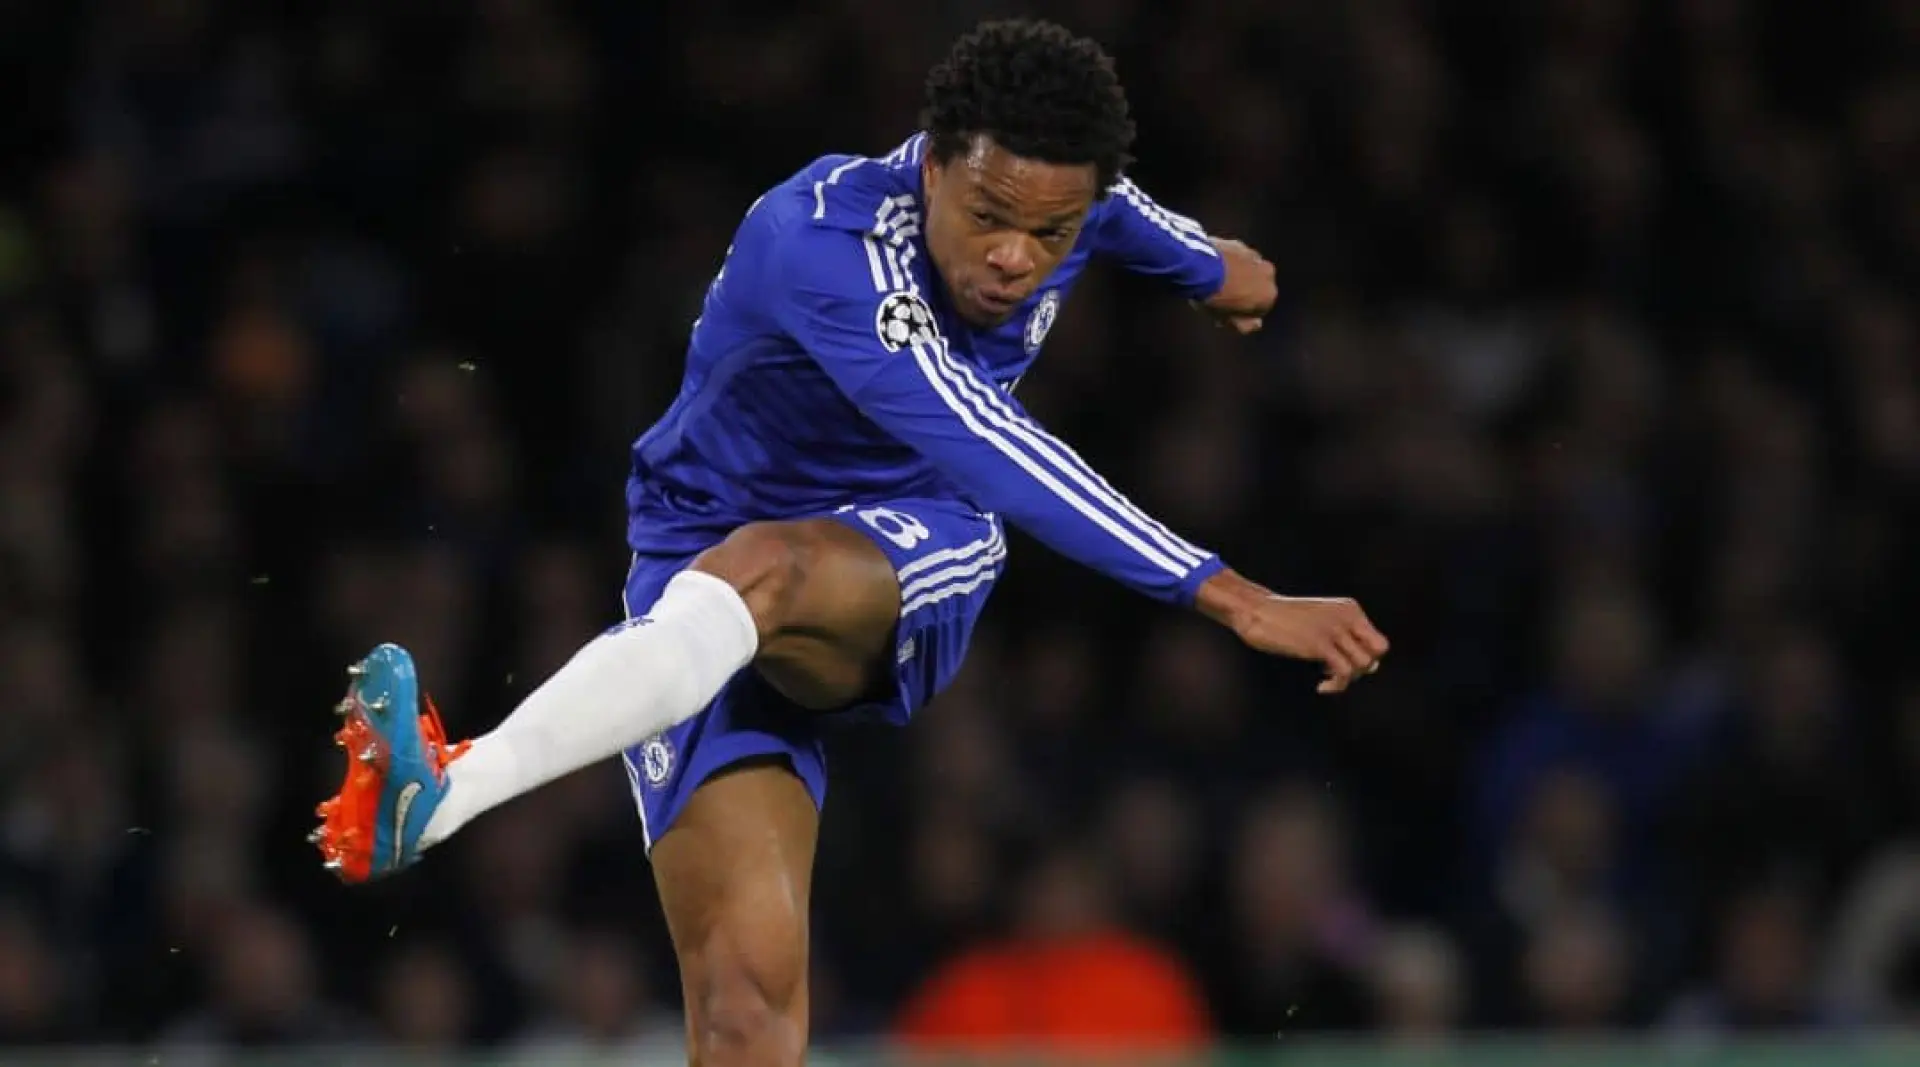 Loic Remy shoots and scores or Chelsea in the Champions League